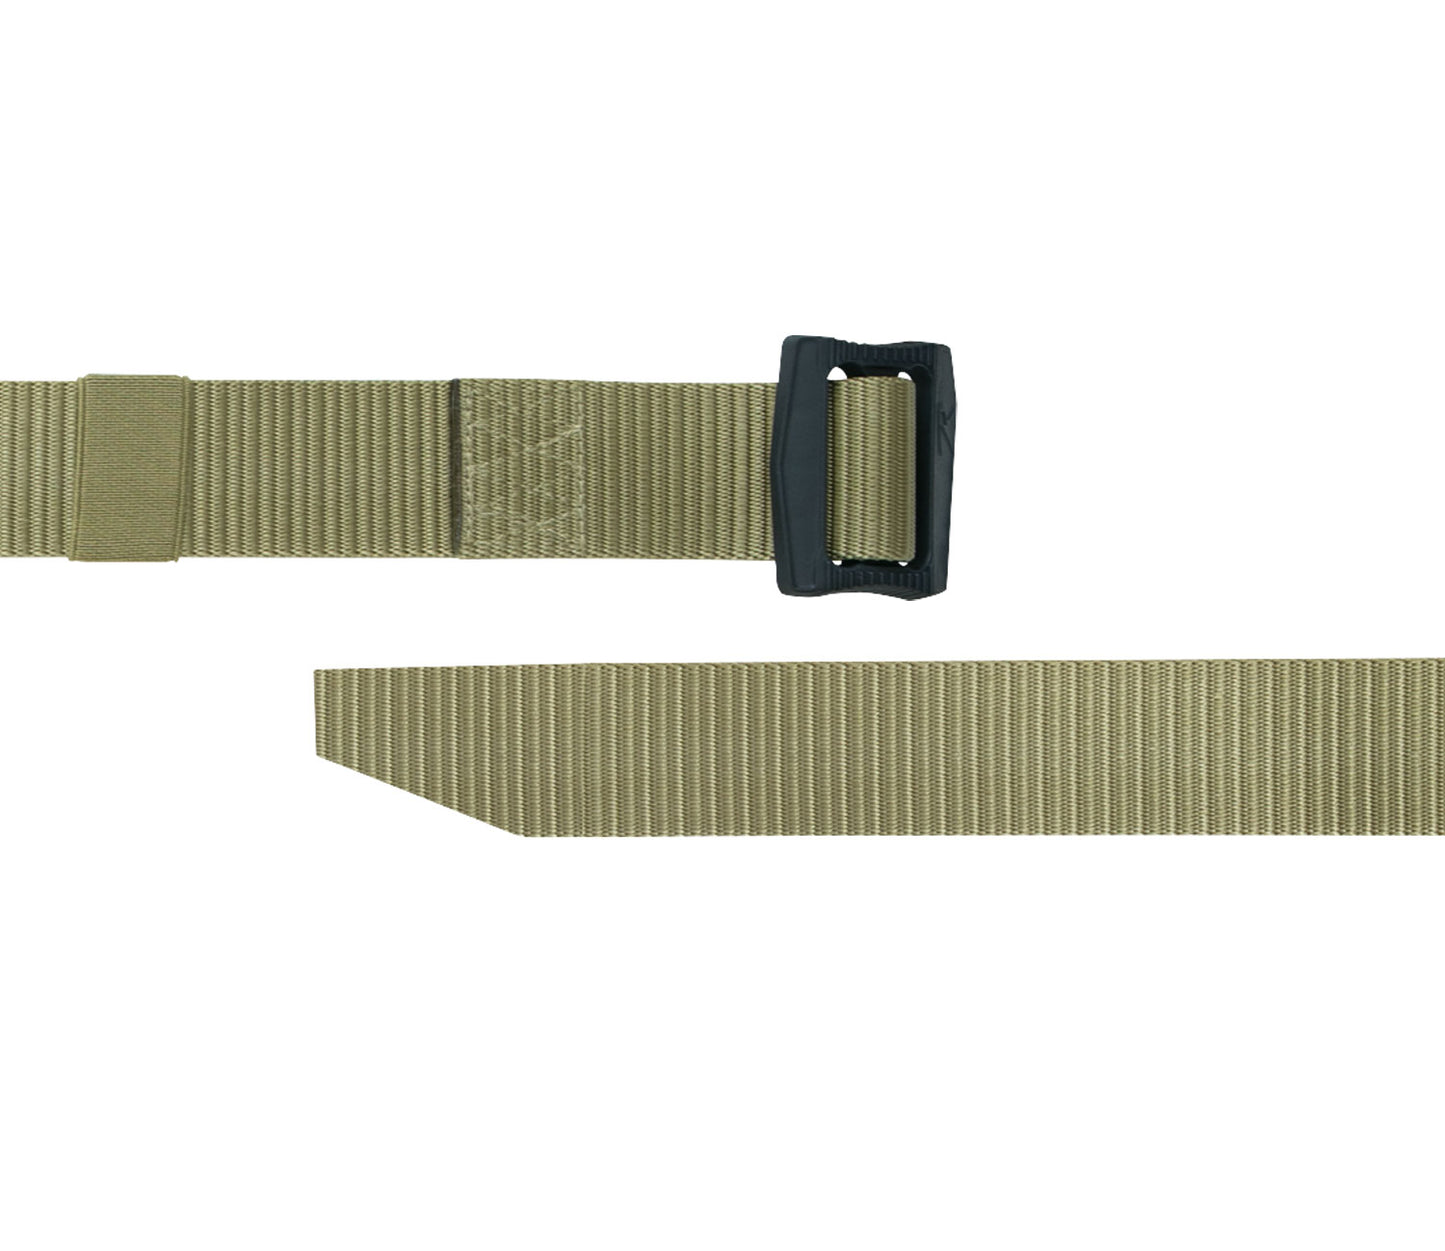 Rothco Deluxe BDU Belt With Security Friendly Plastic Buckle